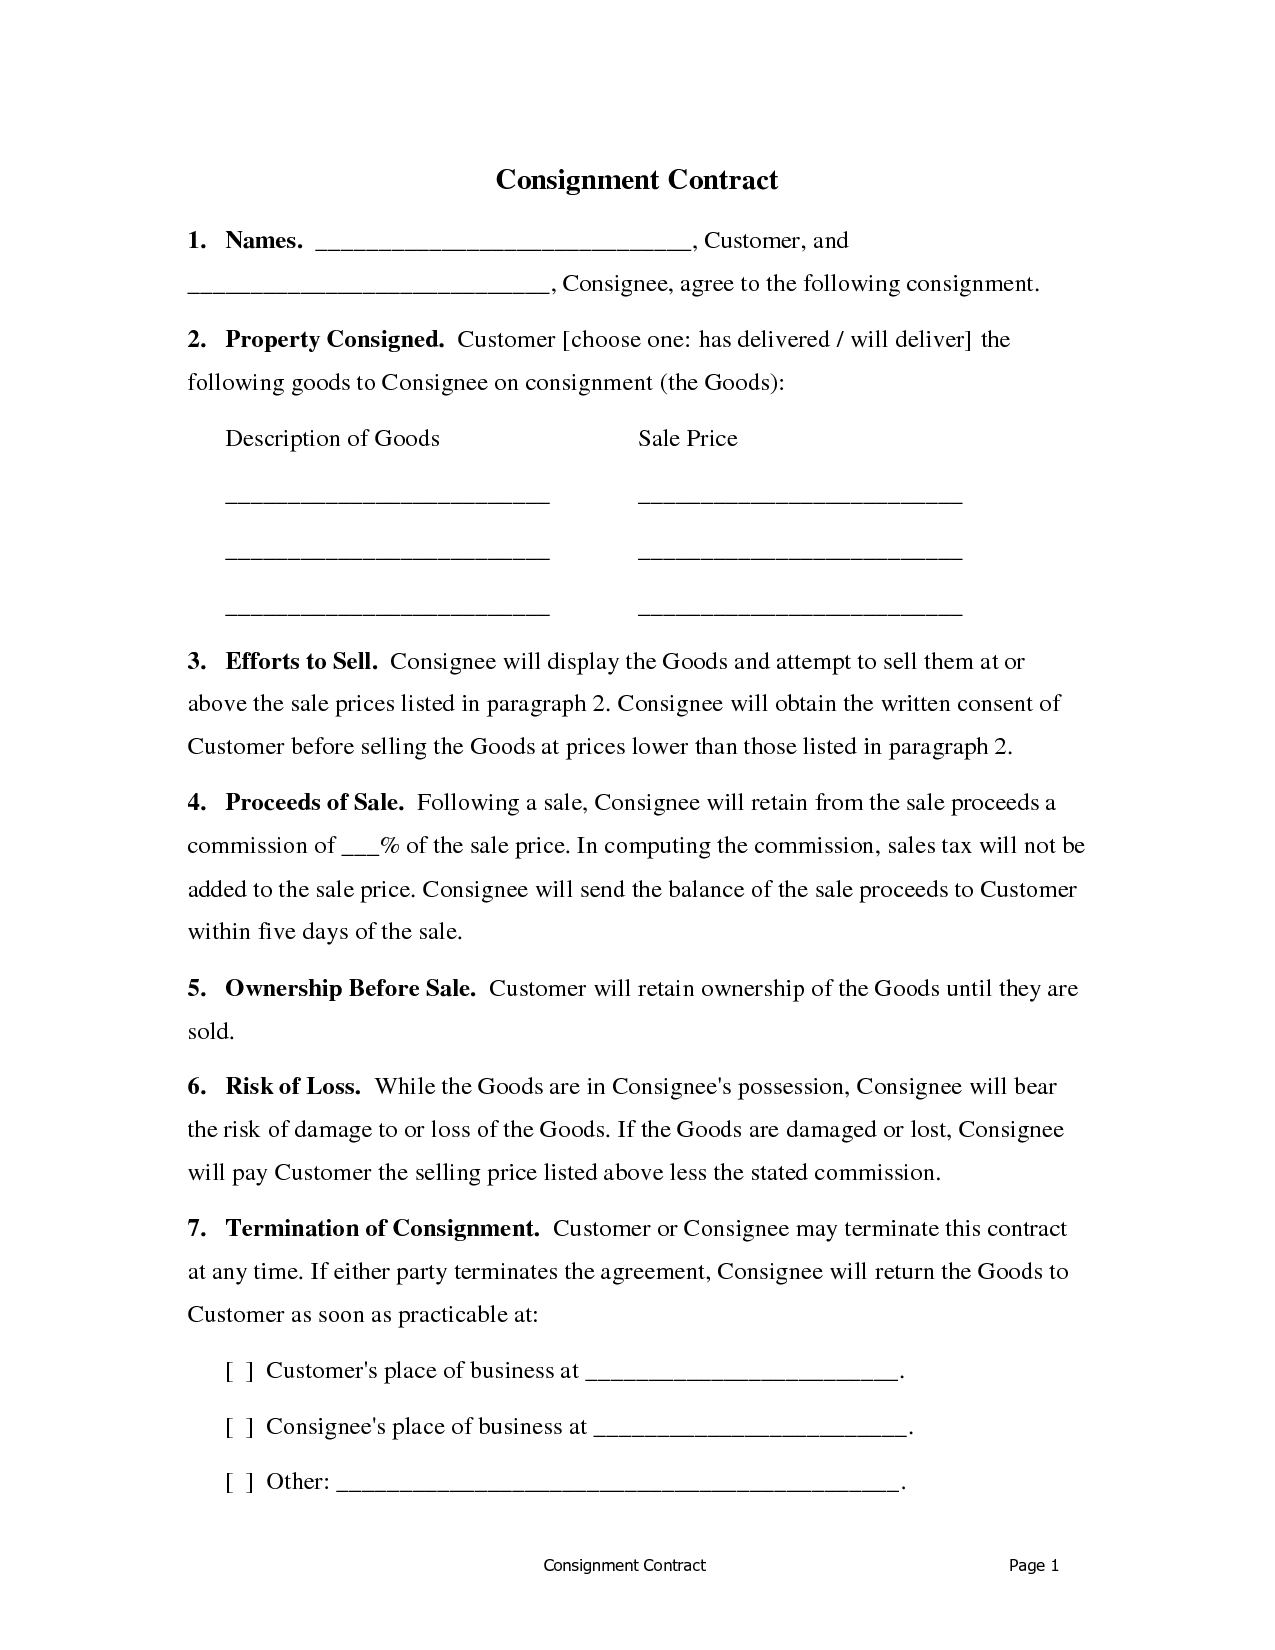 [Get 37+] Sample Letter For Consignment Contract Termination